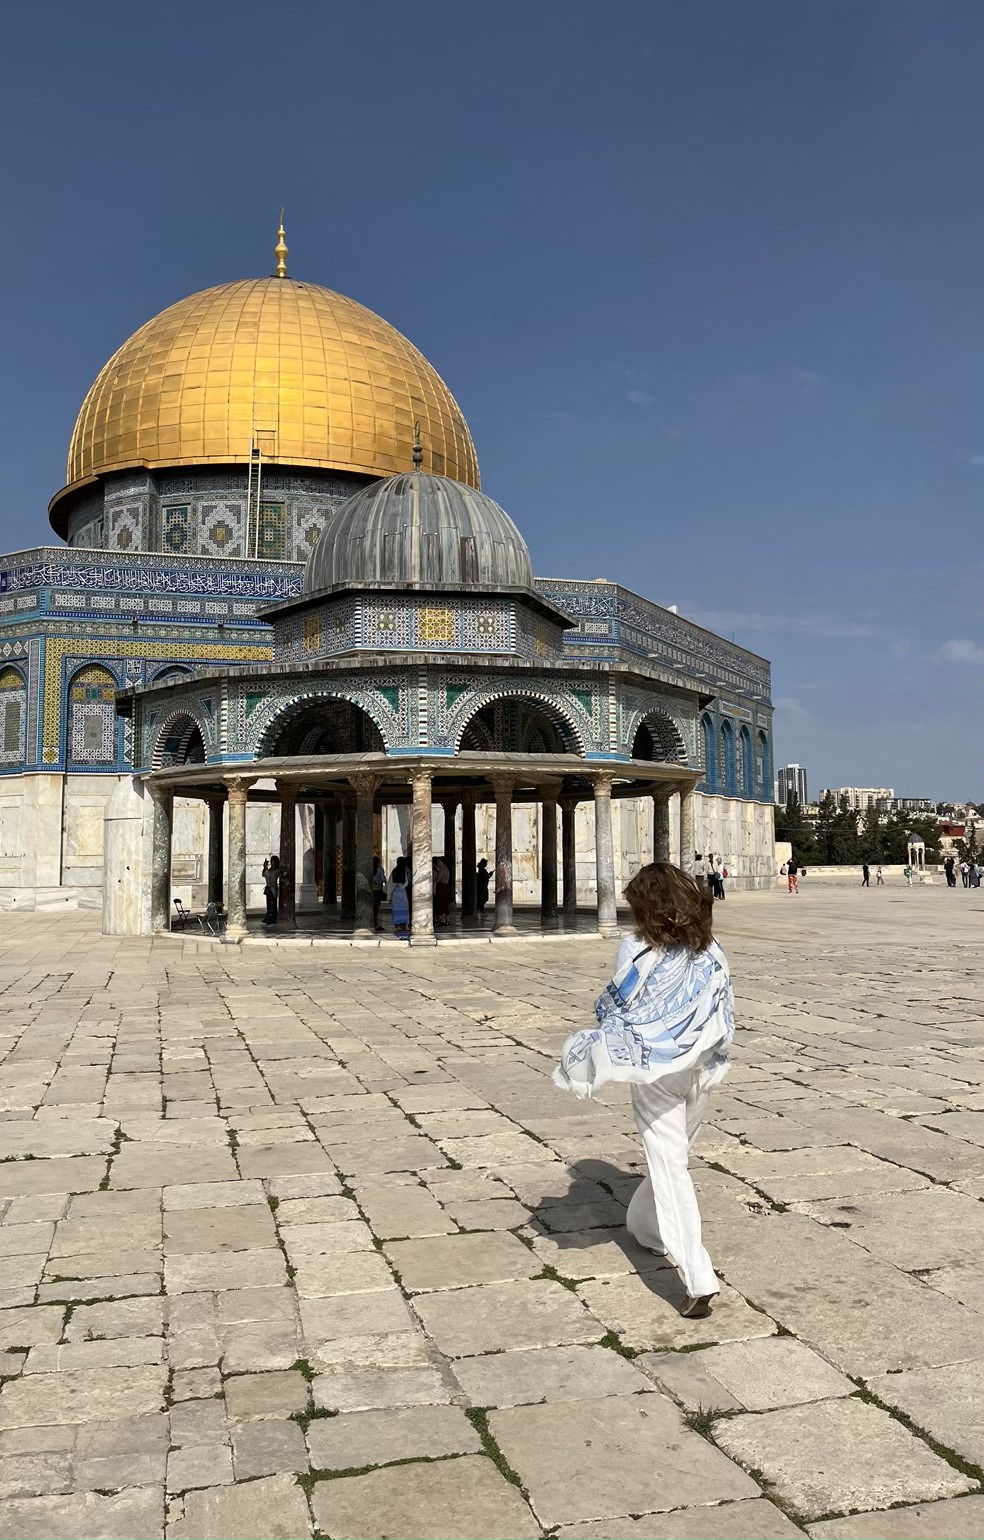 Woman with flowing shirt walking toward the Dome of the Rock in Jerusalem